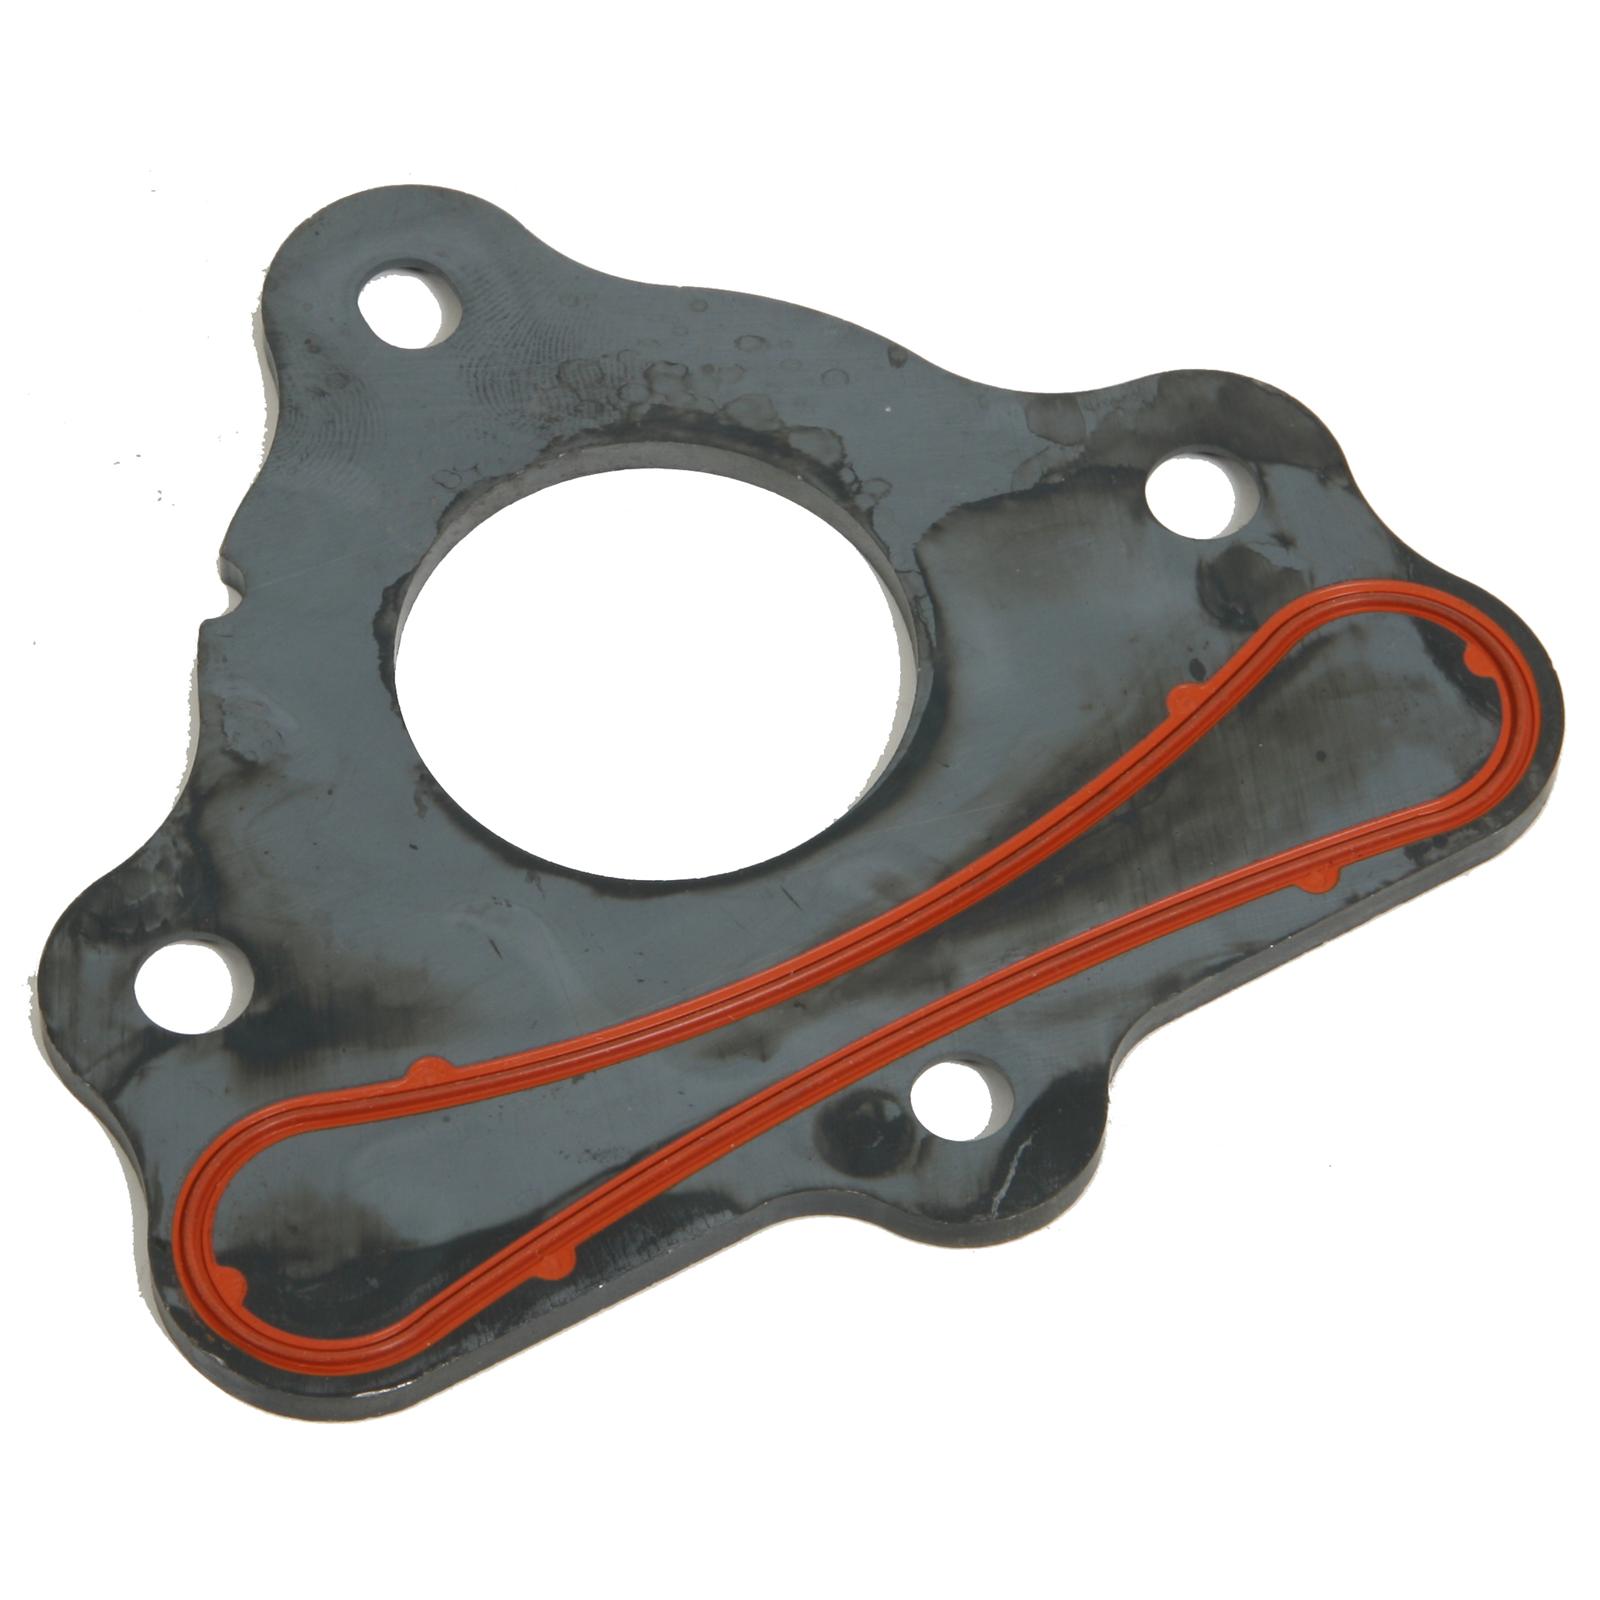 CHNG018 Details about   Chain Guard for ZS125-50 #018